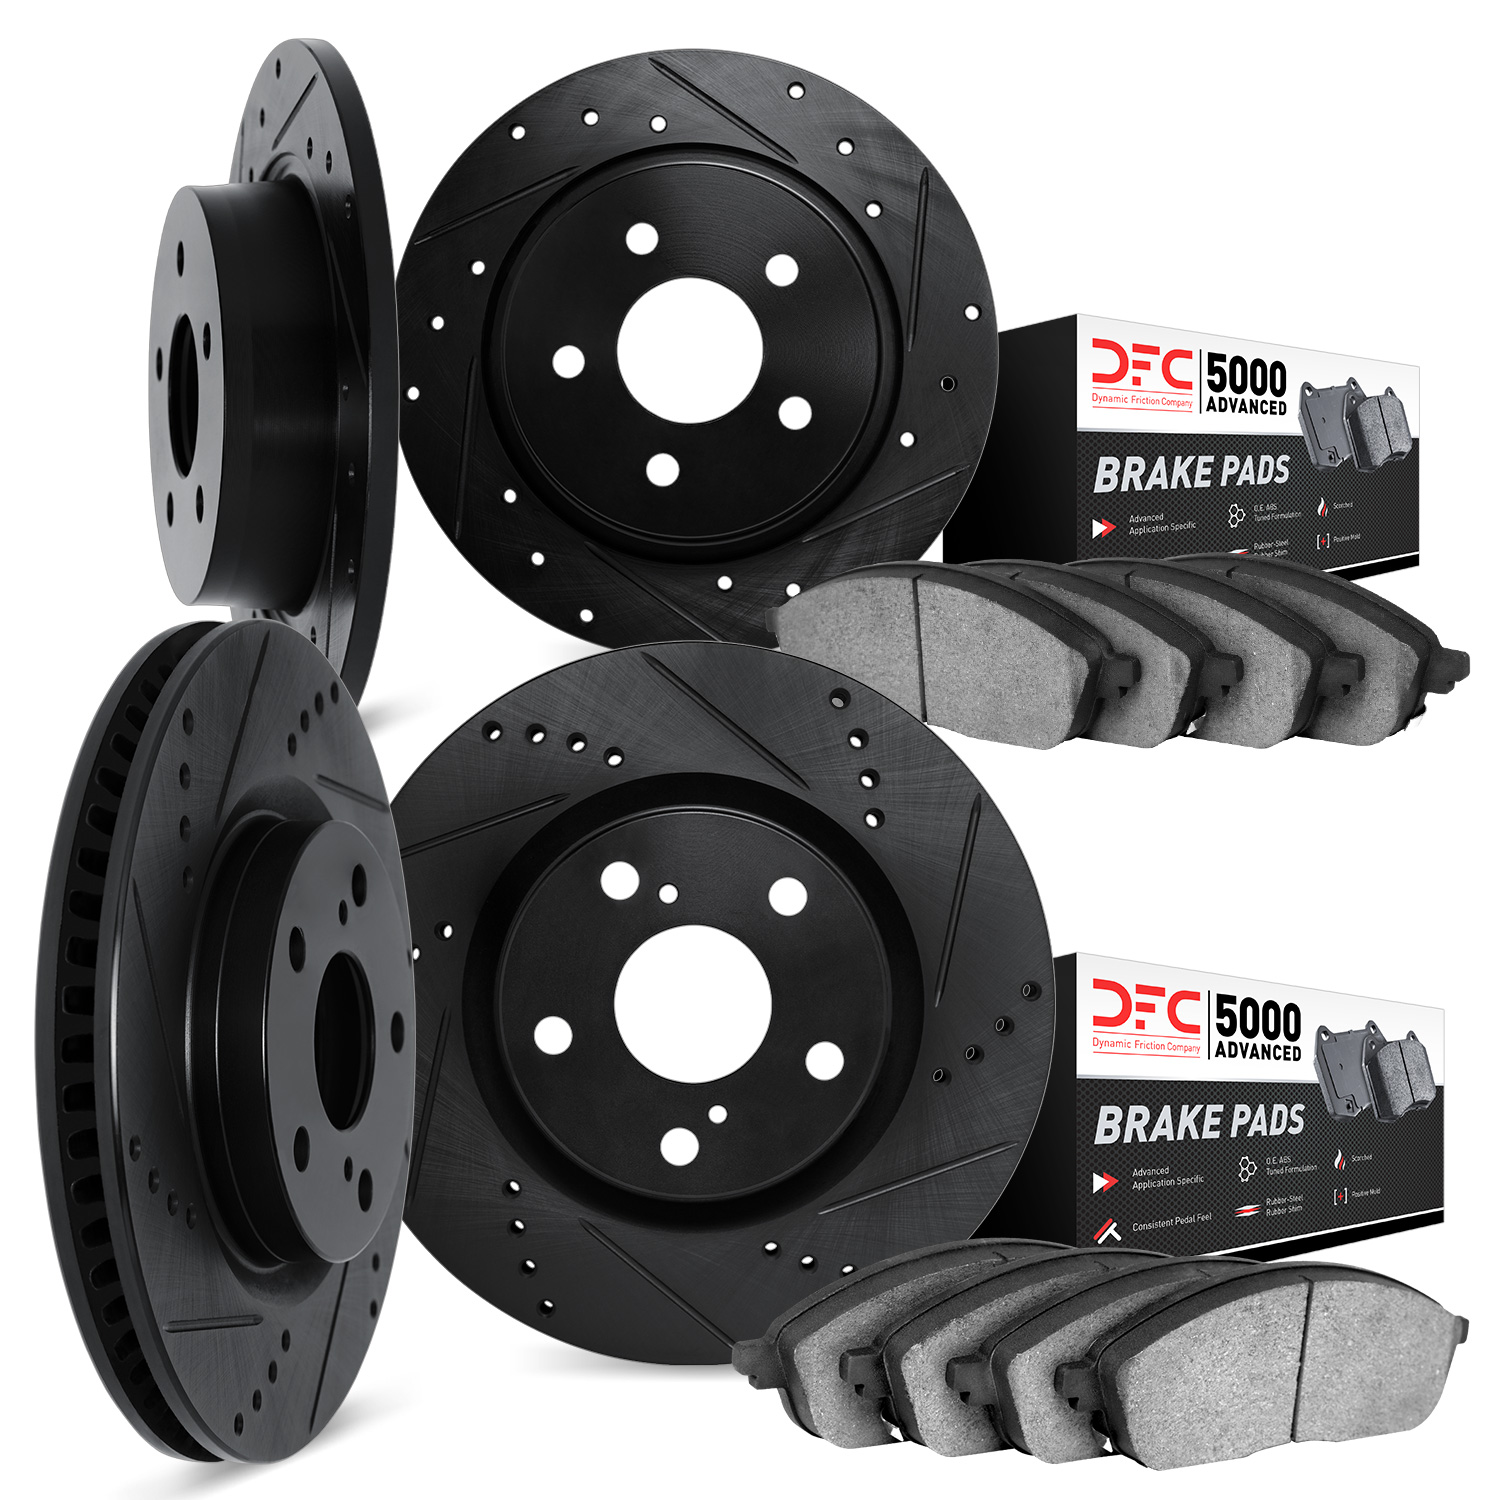 8504-74087 Drilled/Slotted Brake Rotors w/5000 Advanced Brake Pads Kit [Black], 2006-2017 Audi/Volkswagen, Position: Front and R